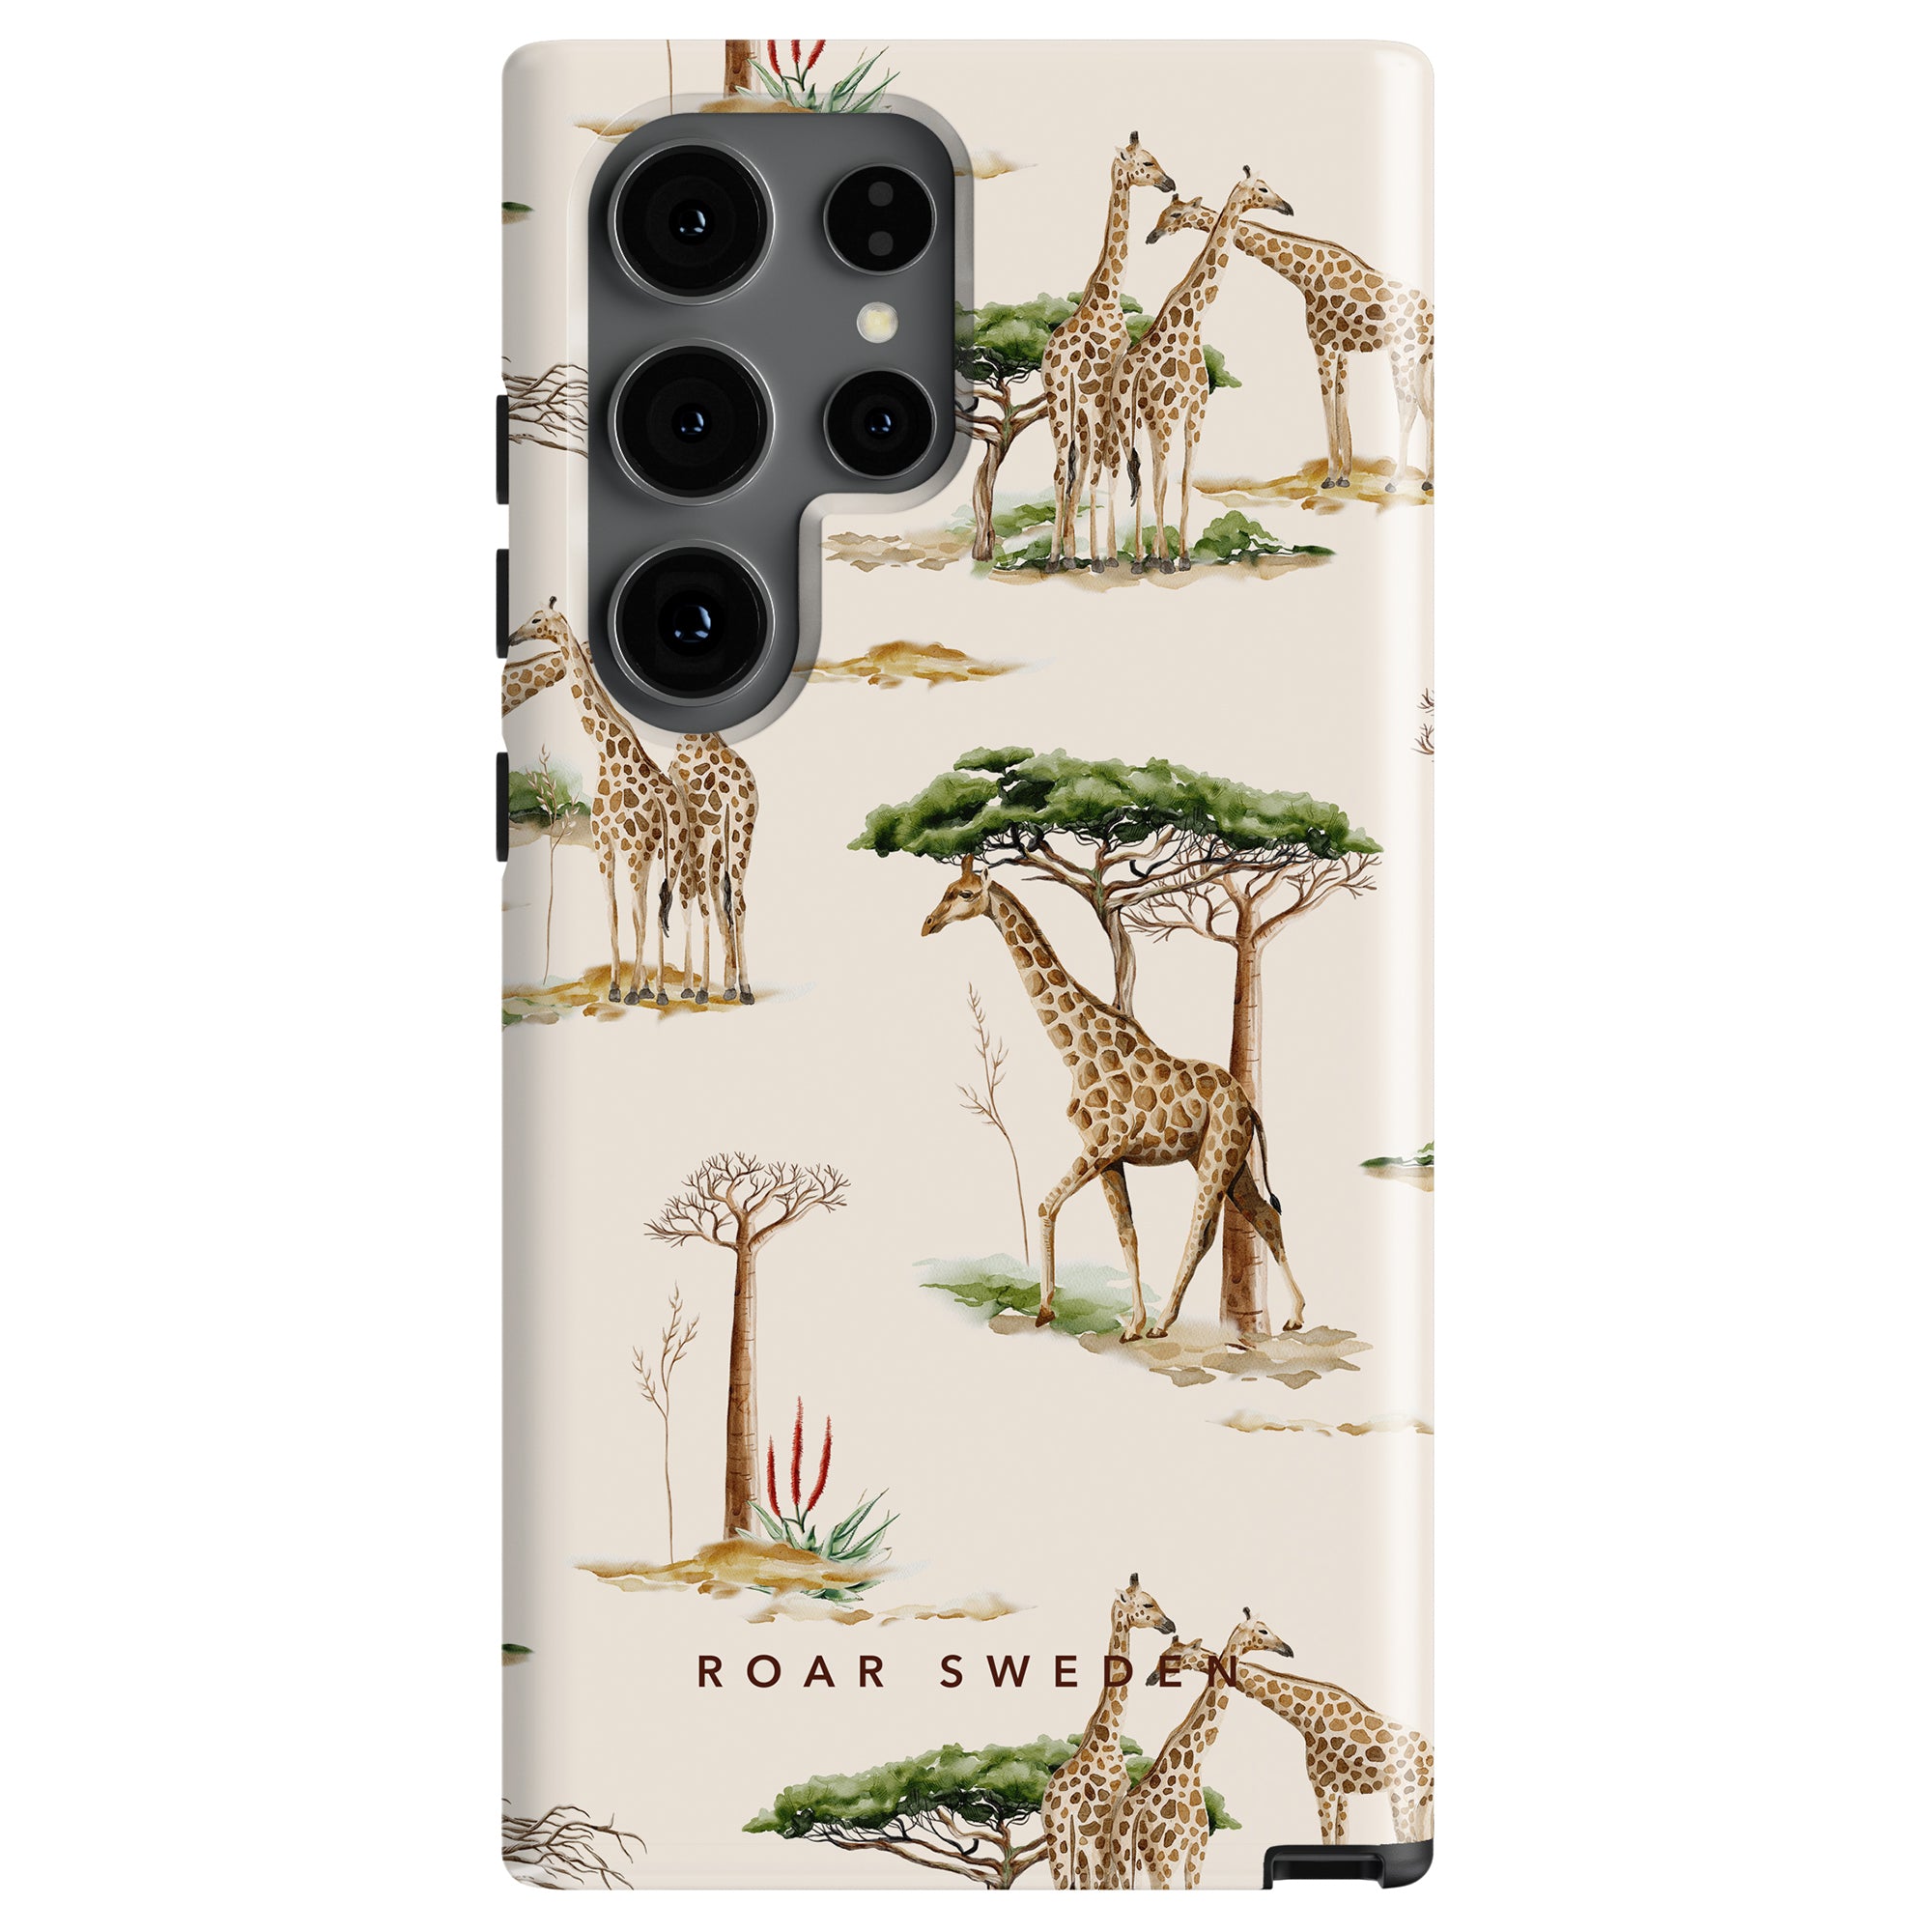 Giraffa - Tough Case featuring a pattern of illustrated giraffes and trees with the text "Roar Swe" at the bottom.